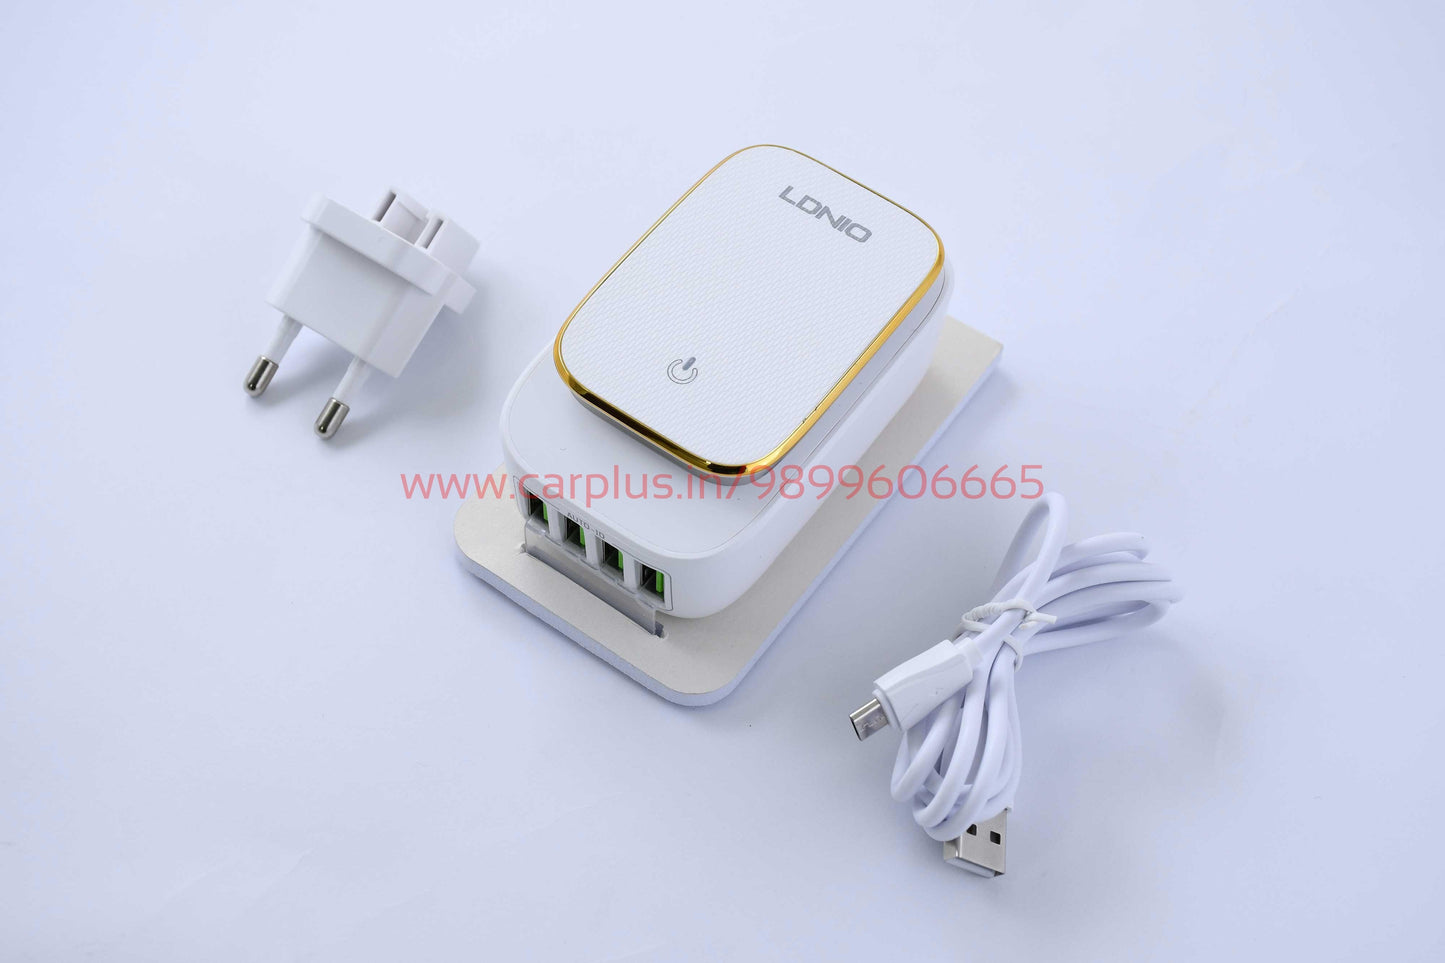 
                  
                    LDNIO 4.4A 4Port USB Home Charger With LED LDNIO CHARGER.
                  
                